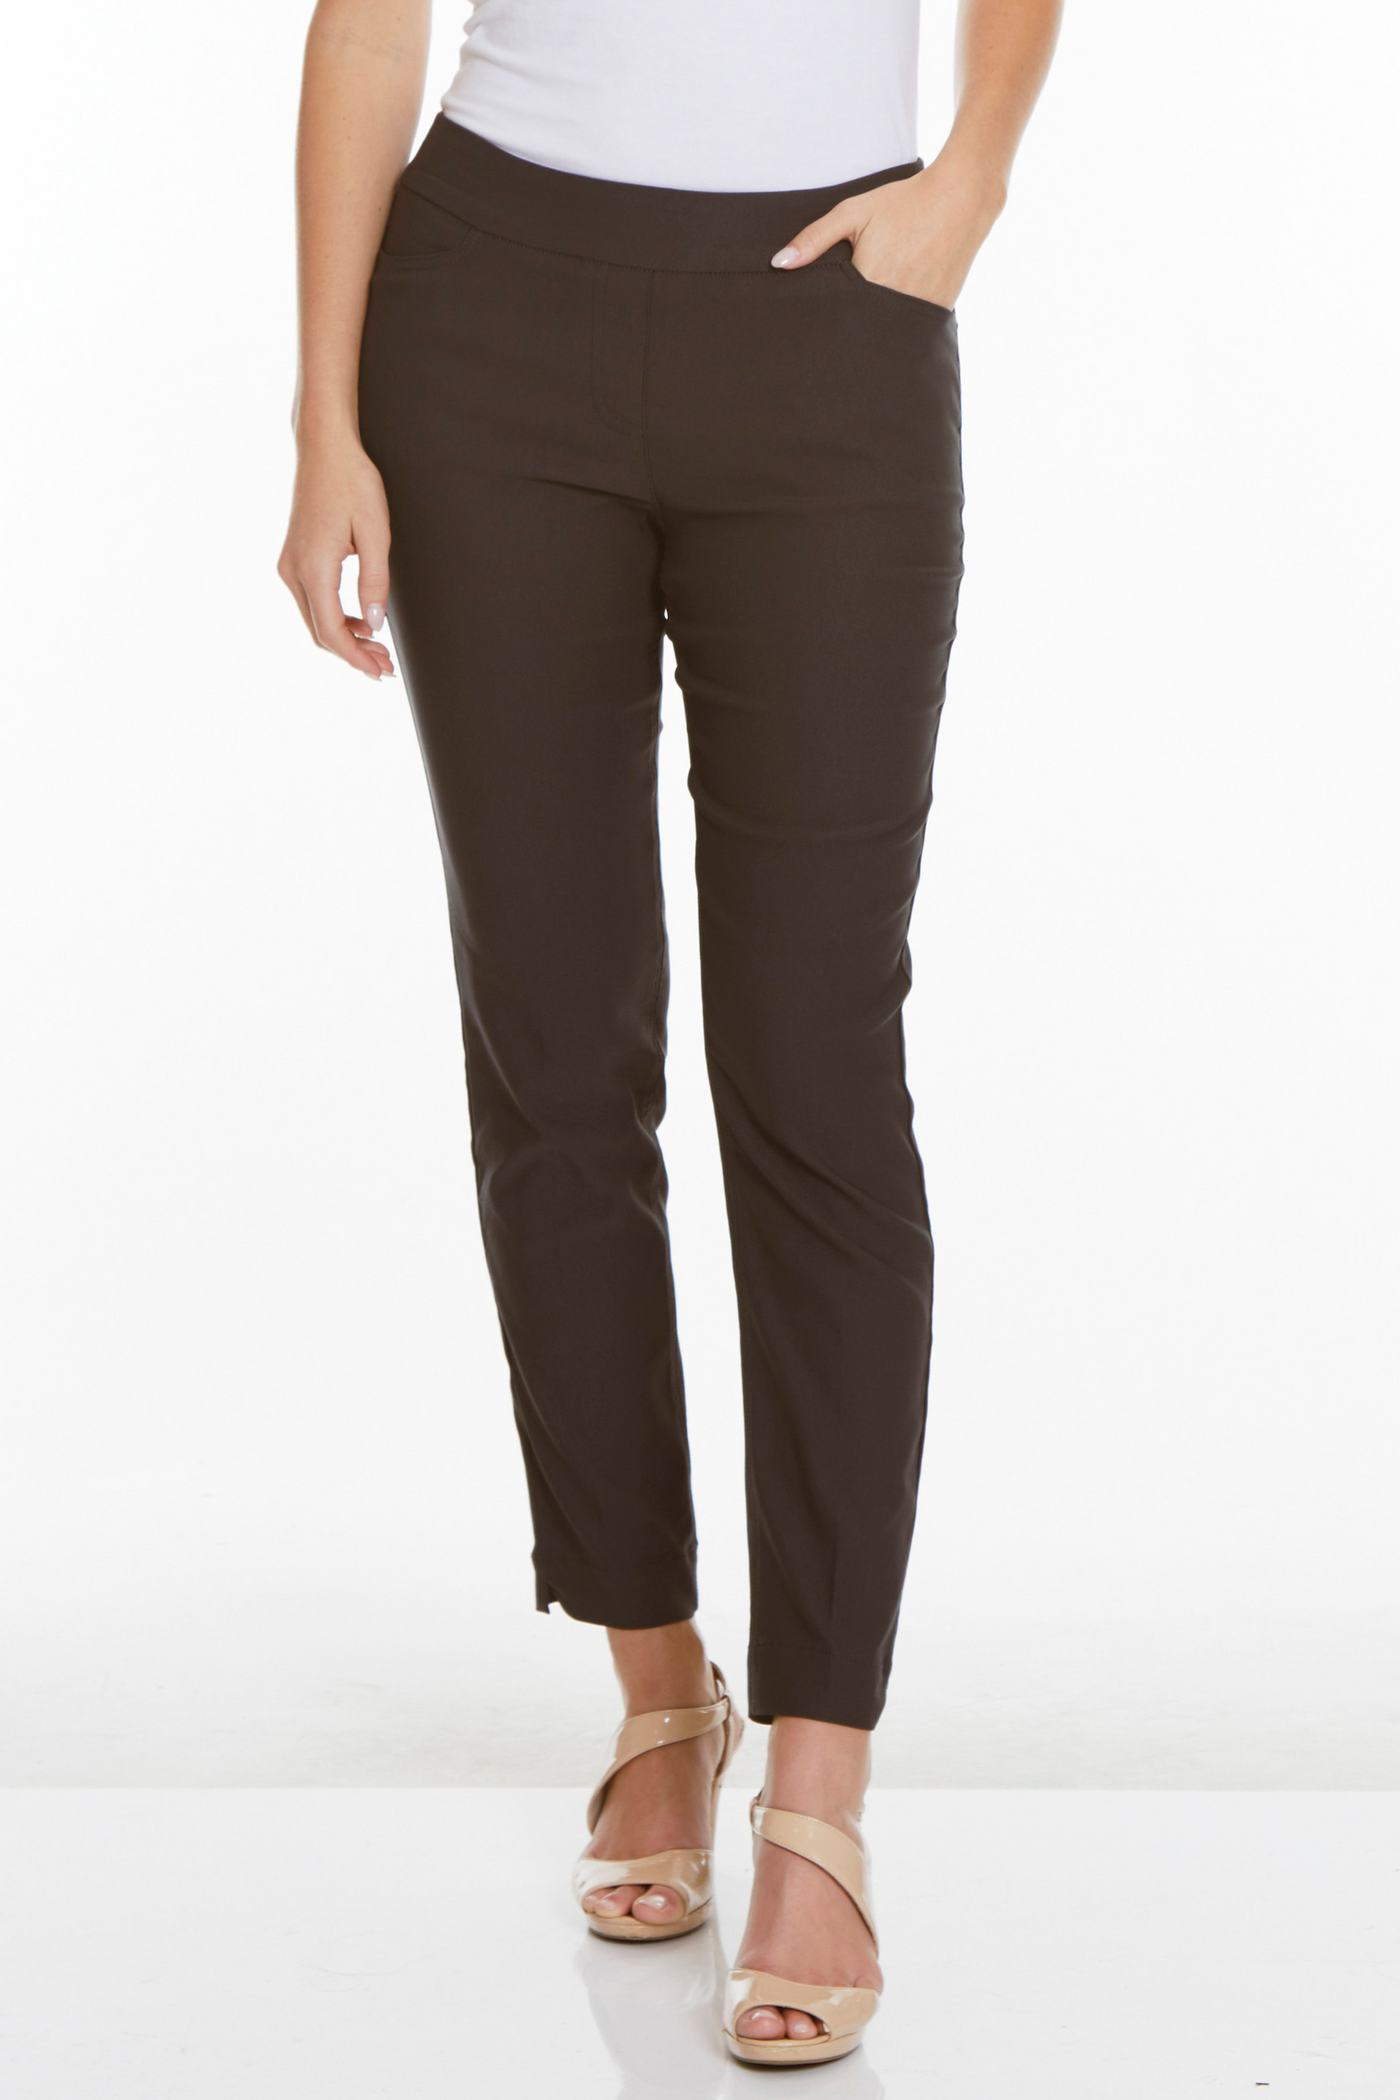 PULL-ON ANKLE PANT with REAL FRONT & BACK POCKETS - Mink